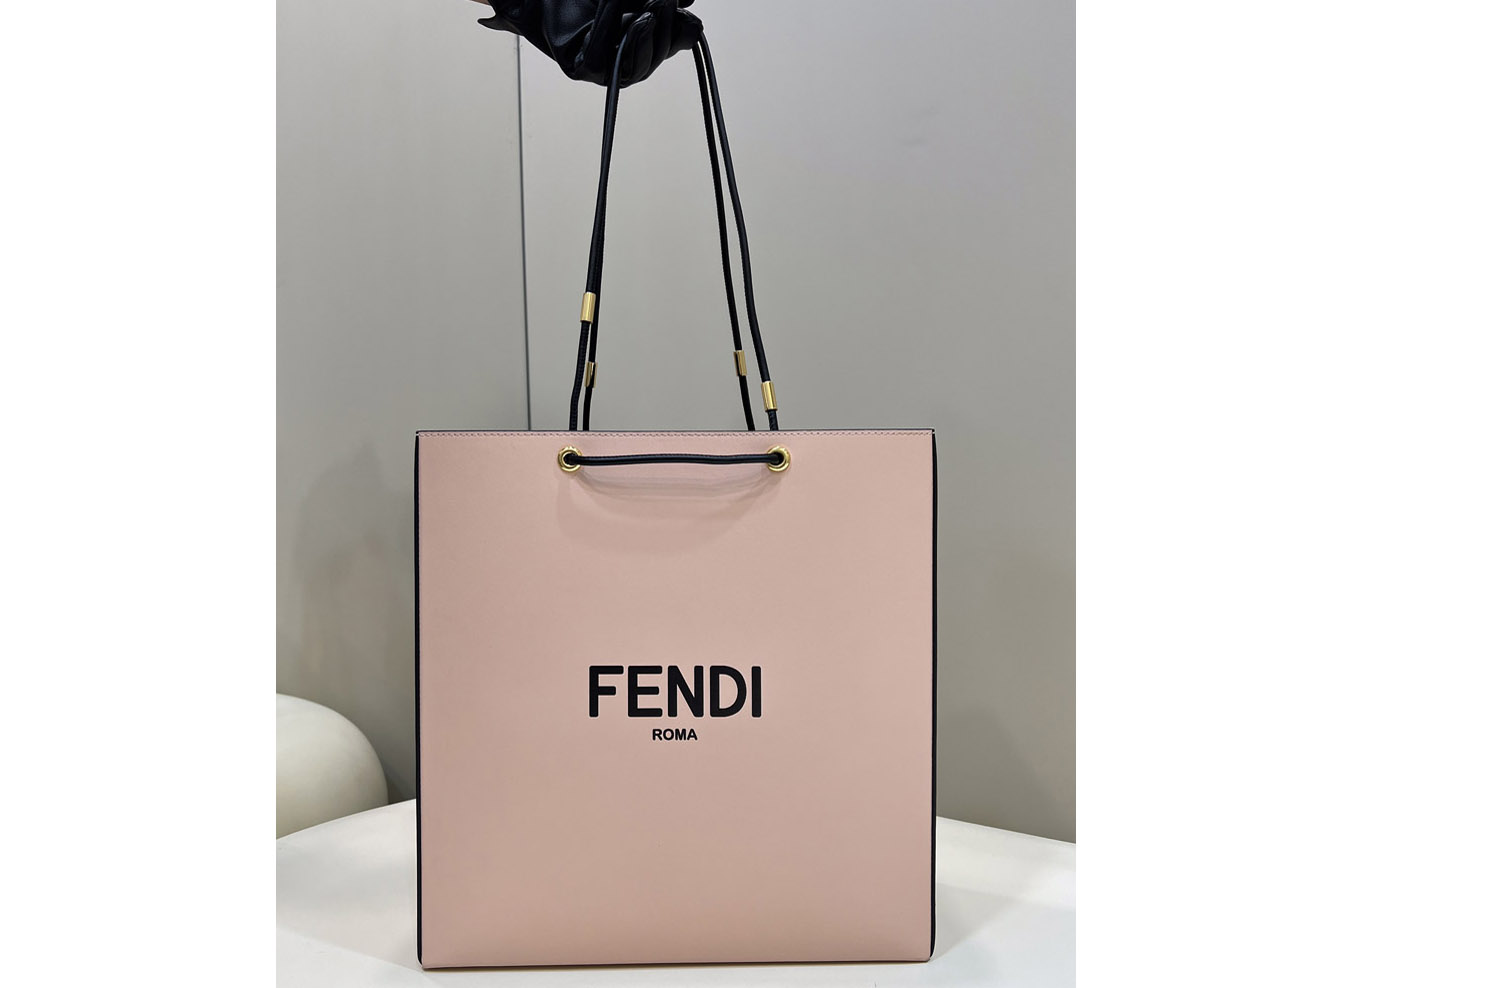 Fendi 8BH383 Shopping medium Tote Bag in Pink Leather